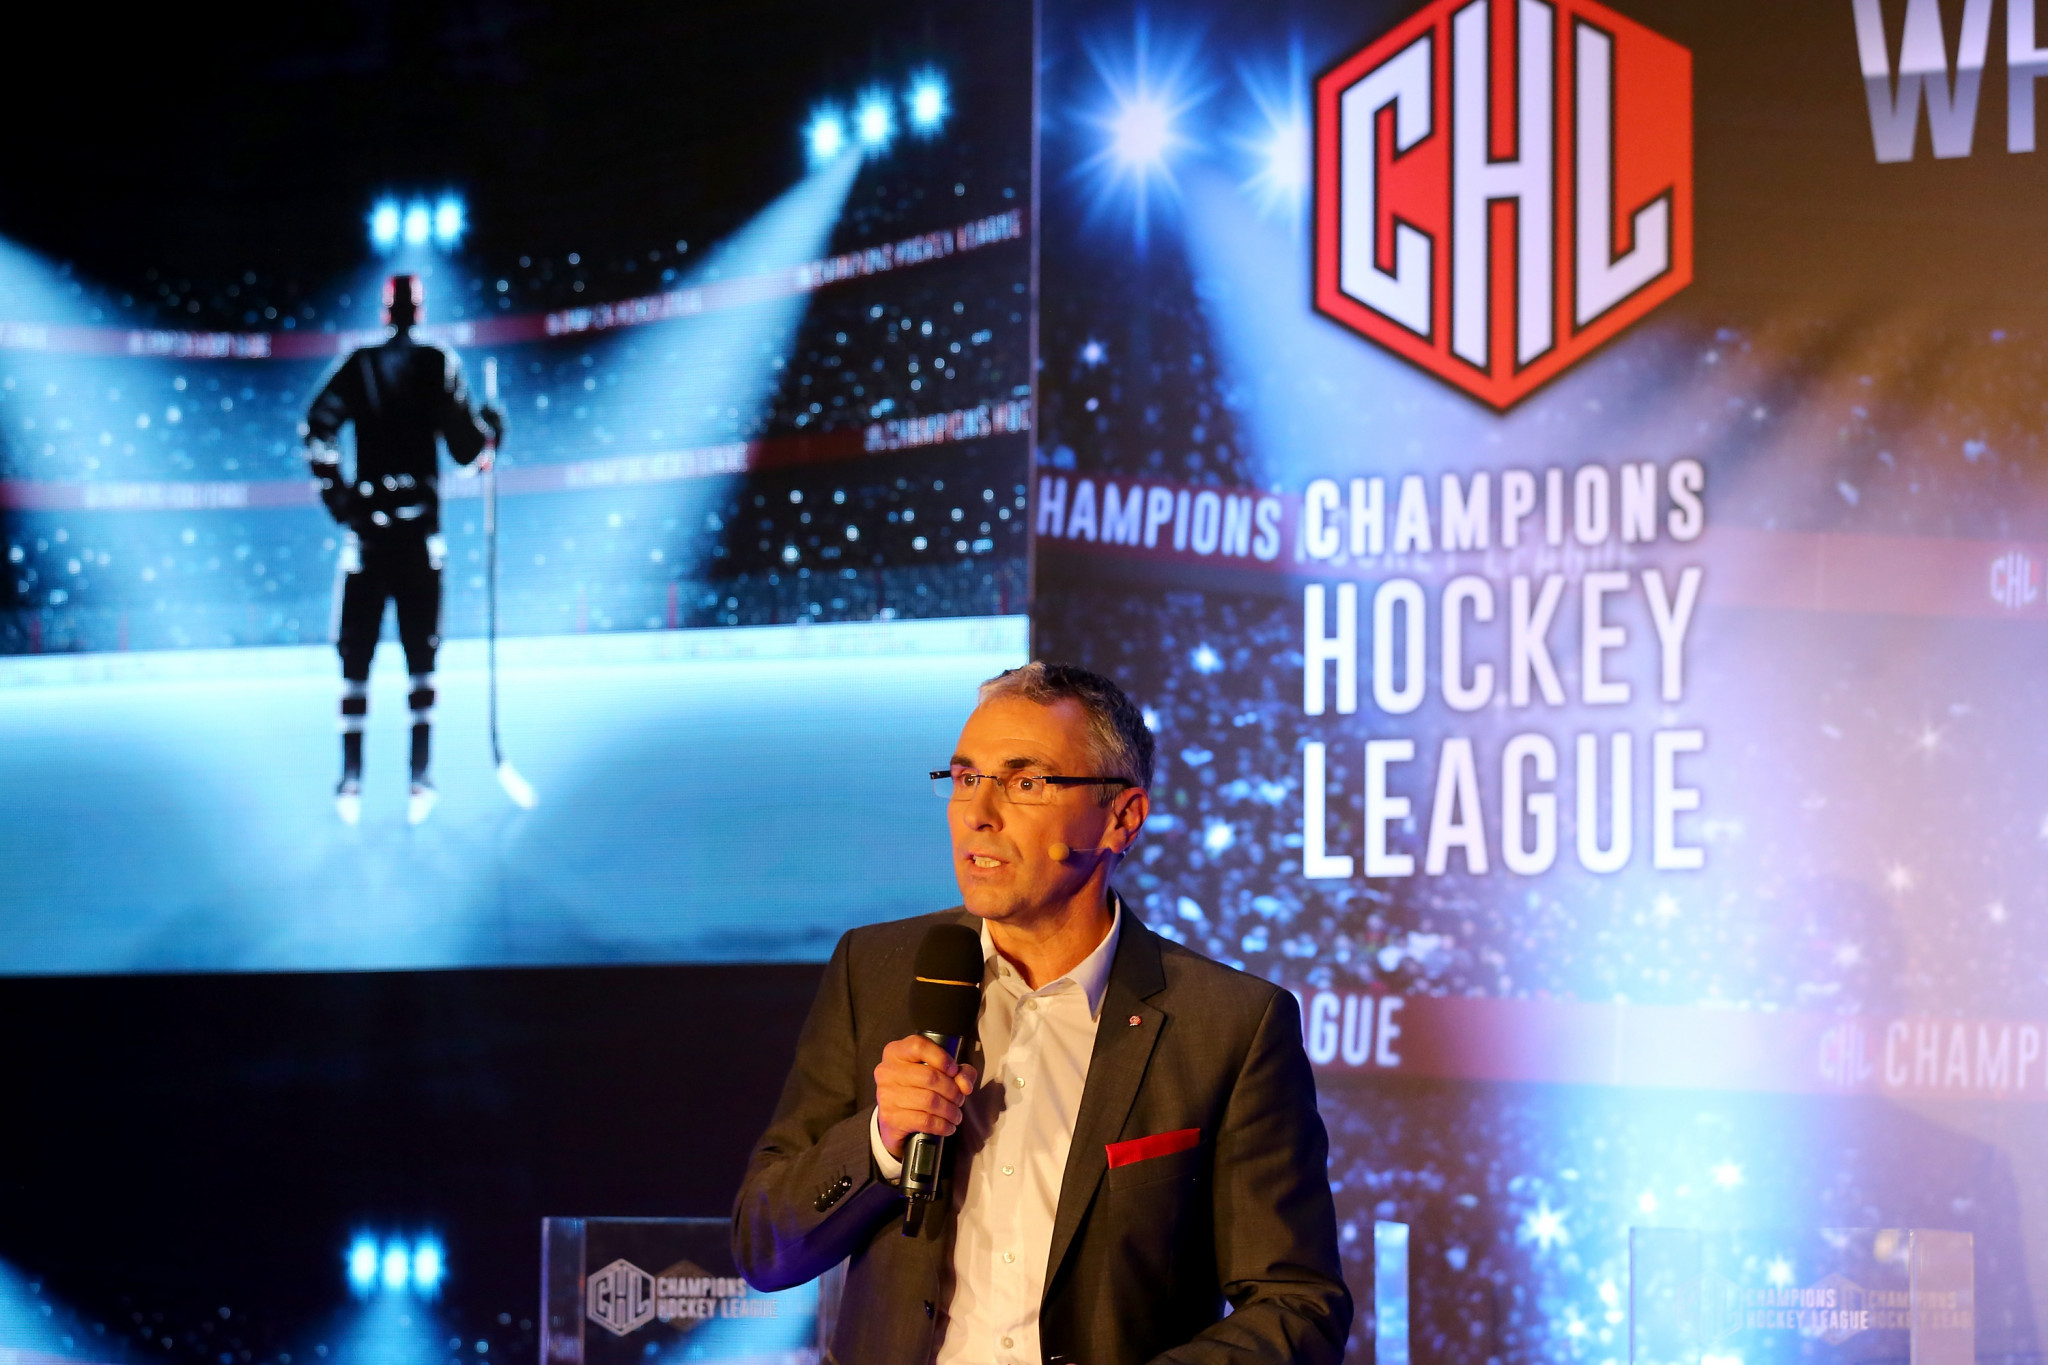 Champions Hockey League boast impressive figures after fan-first strategy